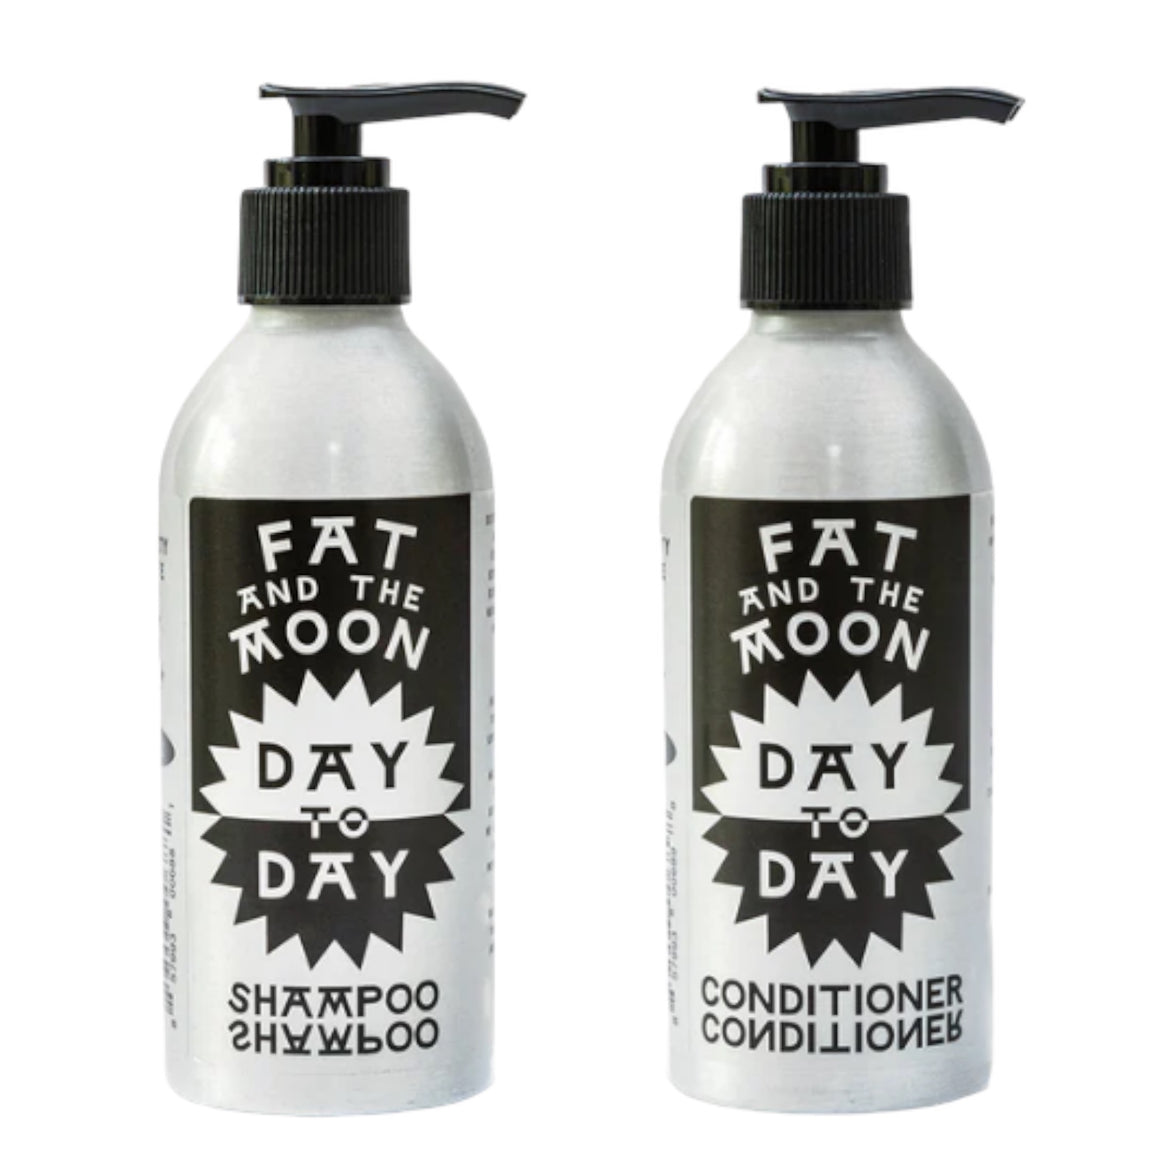 Day to Day Conditioner 227ml  - Fat & The Moon